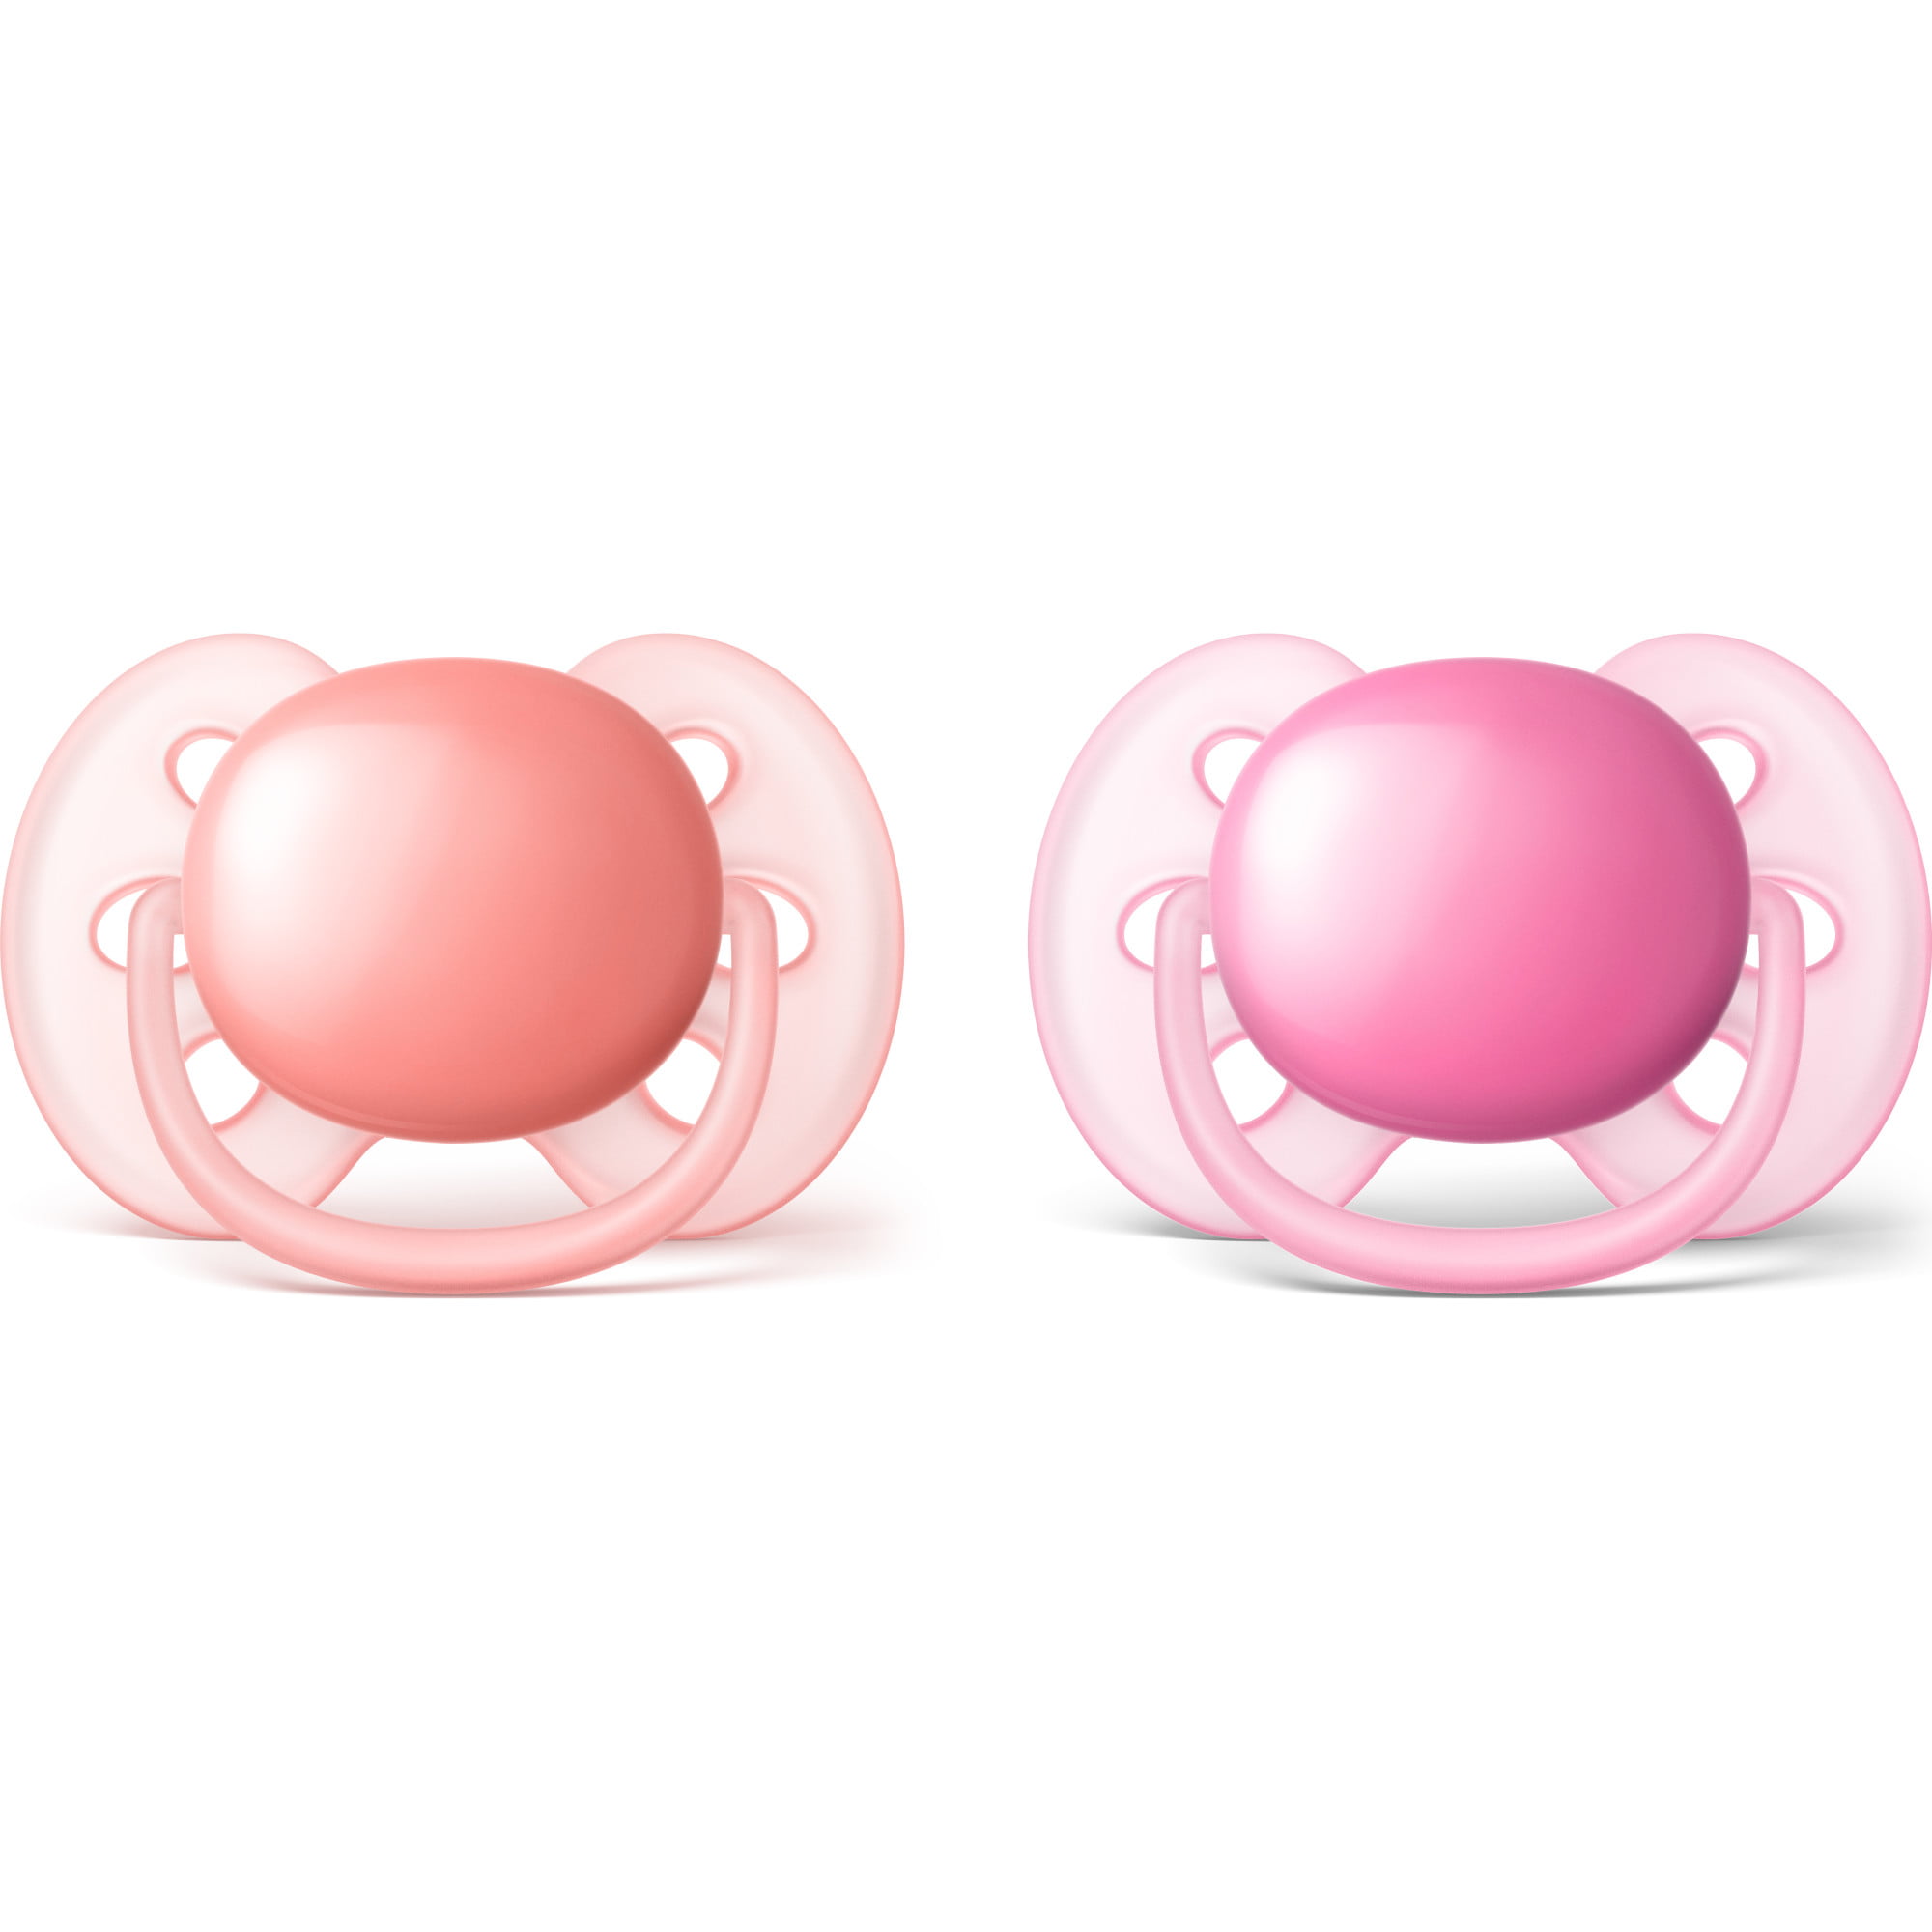 2 pack 6-18 months Pink/Peach Philips Avent Ultra Soft Pacifier SCF213/22